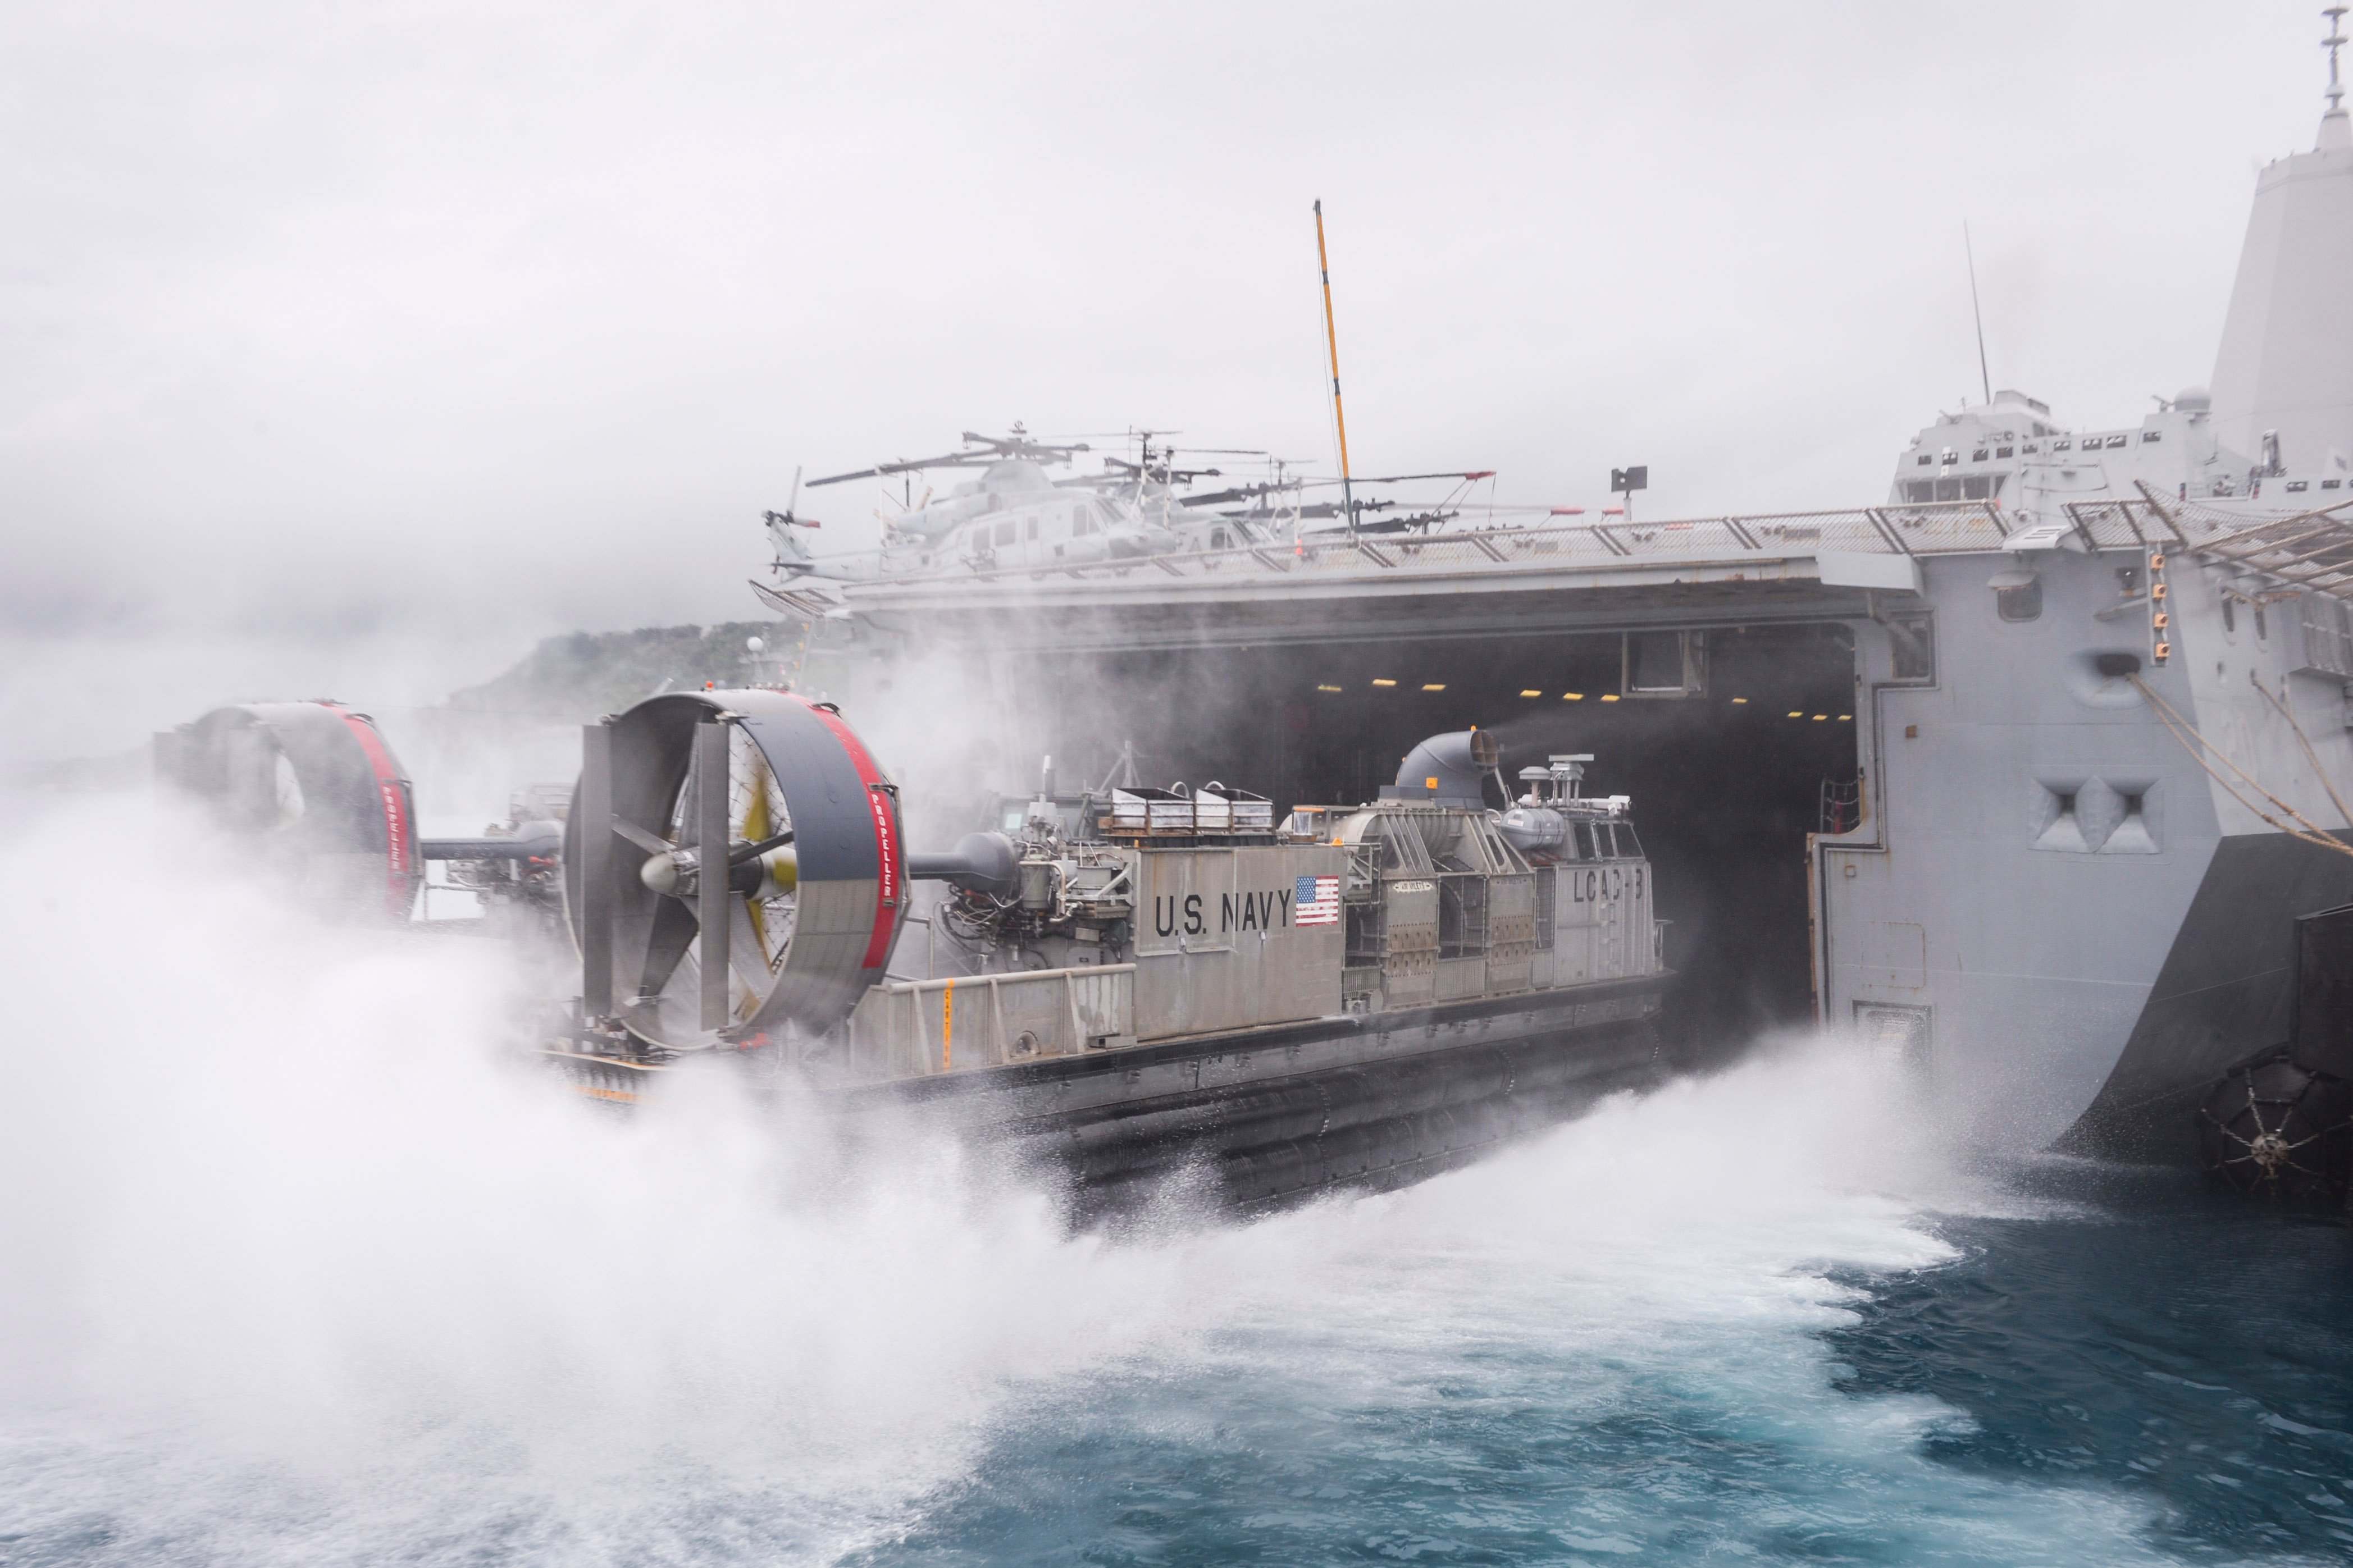 A Landing Craft Air Cushion (LCAC) enters the well deck of the amphibious transport dock ship USS Green Bay (LPD 20) on June 6, 2015. Commandant Gen. Joseph Dunford said the Marines can no longer rely on traditional amphibious operations in the Pacific and will instead have to consider alternate operations models and new platforms. US Navy photo.